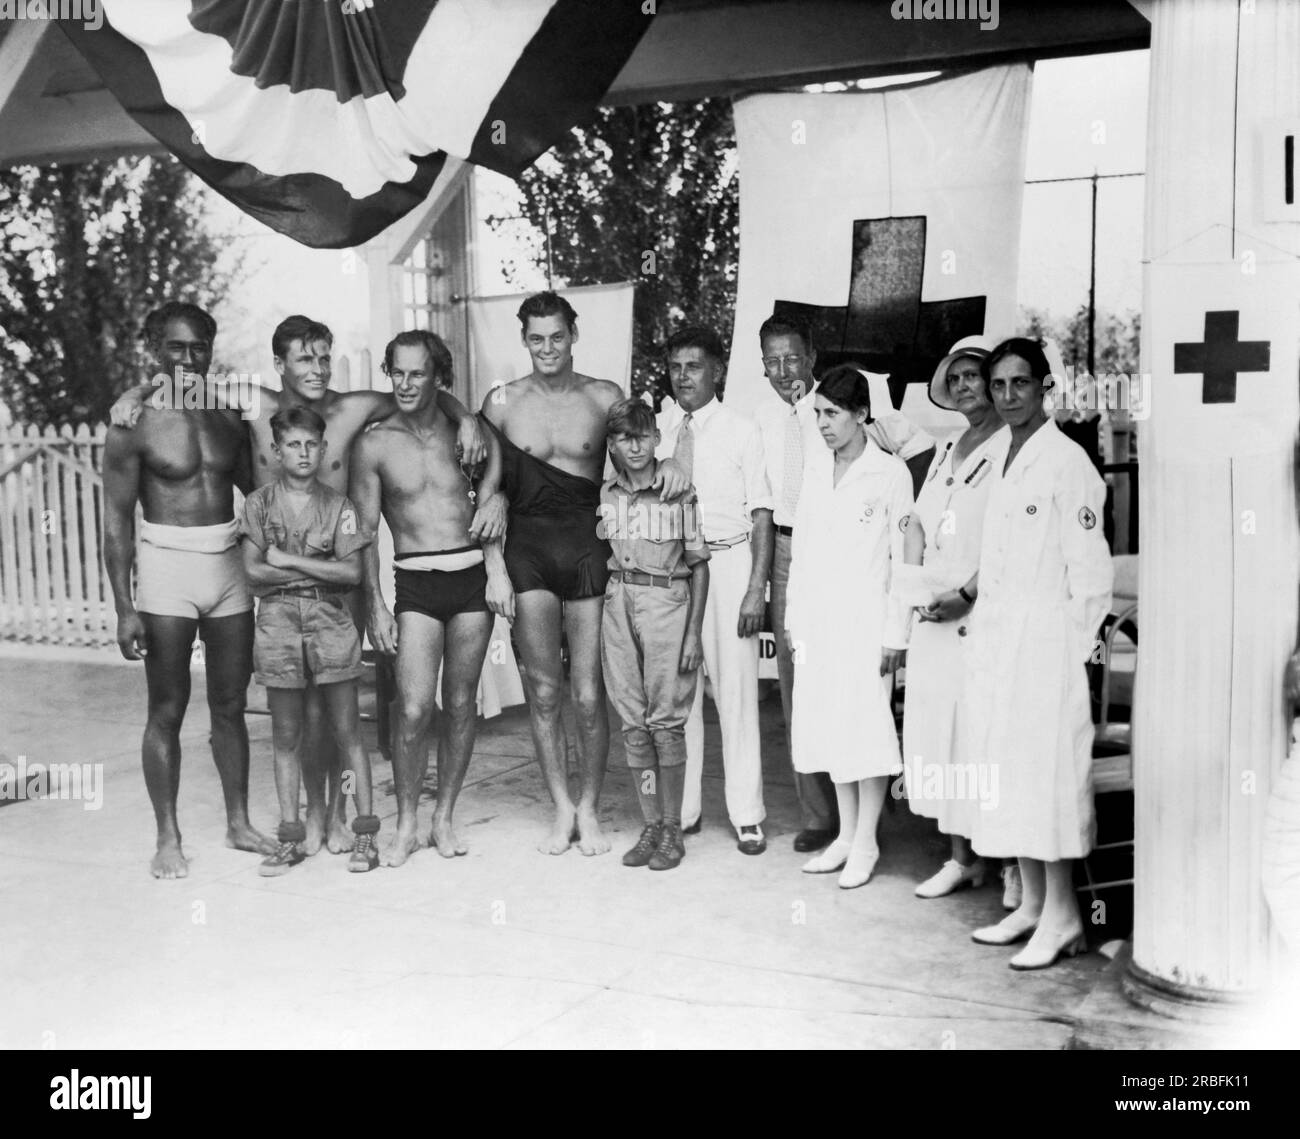 Cincinnati, Ohio:  July, 1932 At the Olympic tryouts are,left to right: Duke F. Kahanamoku, Clarence 'Buster' Crabbe, Harold 'Stubby' Kruger, Johnny Weissmueler, Judge Elmer F. Hunsicker, Paul Goss, Mrs. Mabel Fitzmorris, Mrs. Ella Layne Brown, and Mrs. Carolyn Wayman. Two boy scout messengers stand in front. Stock Photo